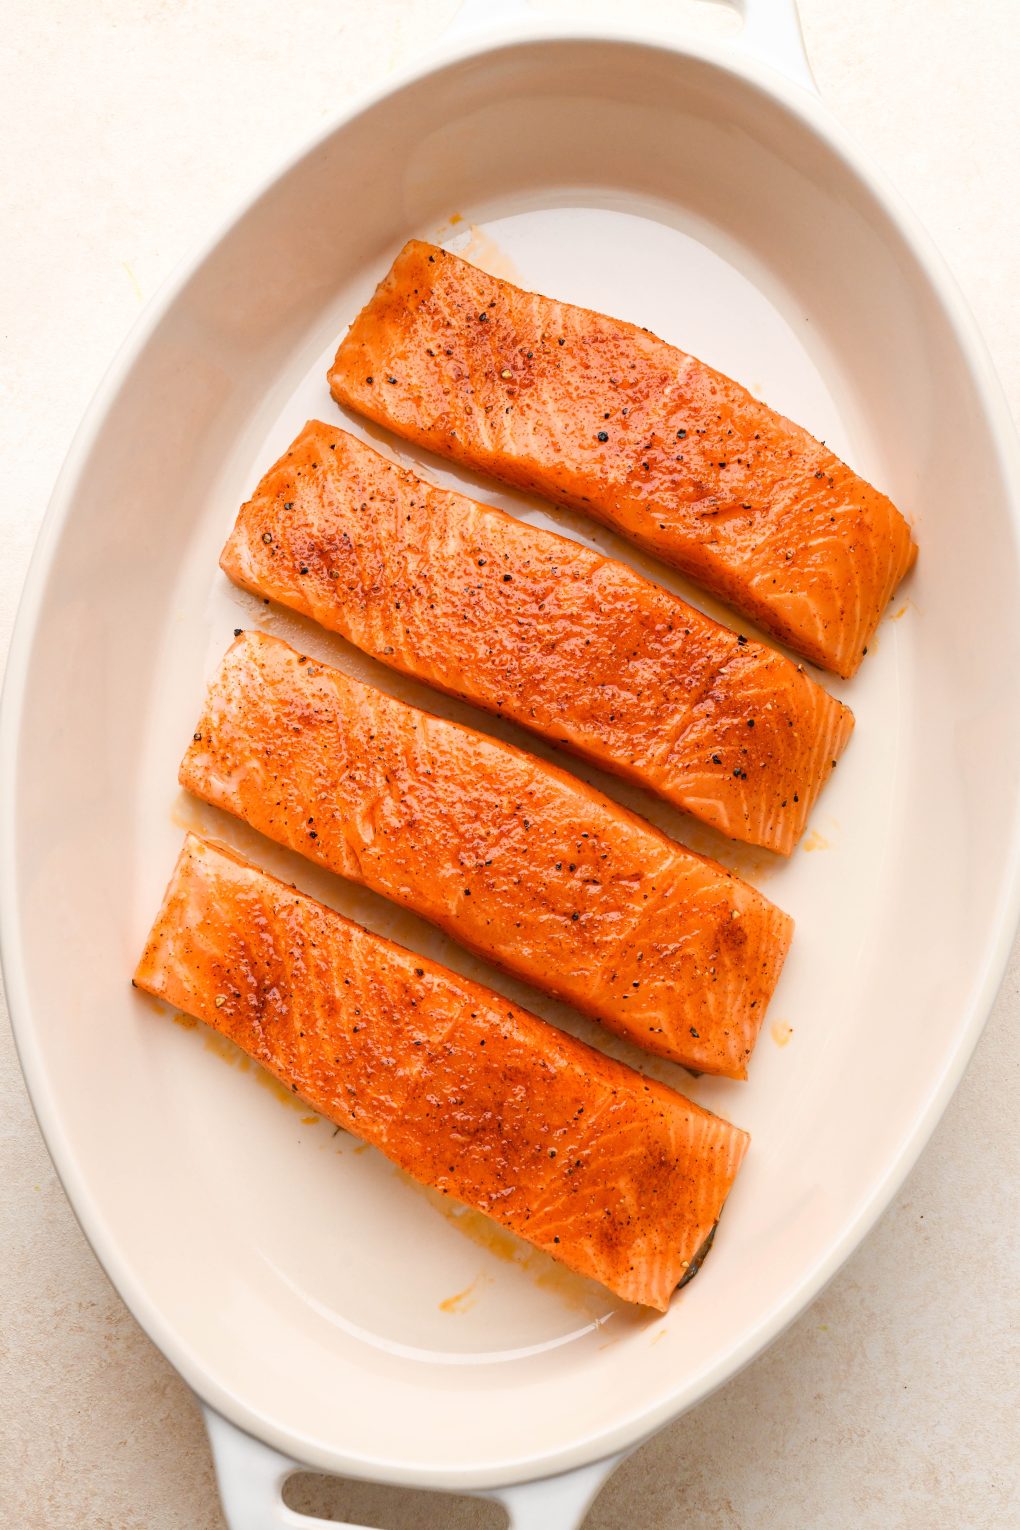 How to make maple pecan glazed salmon: Raw salmon fillets seasoned with coated with olive oil in a ceramic baking dish